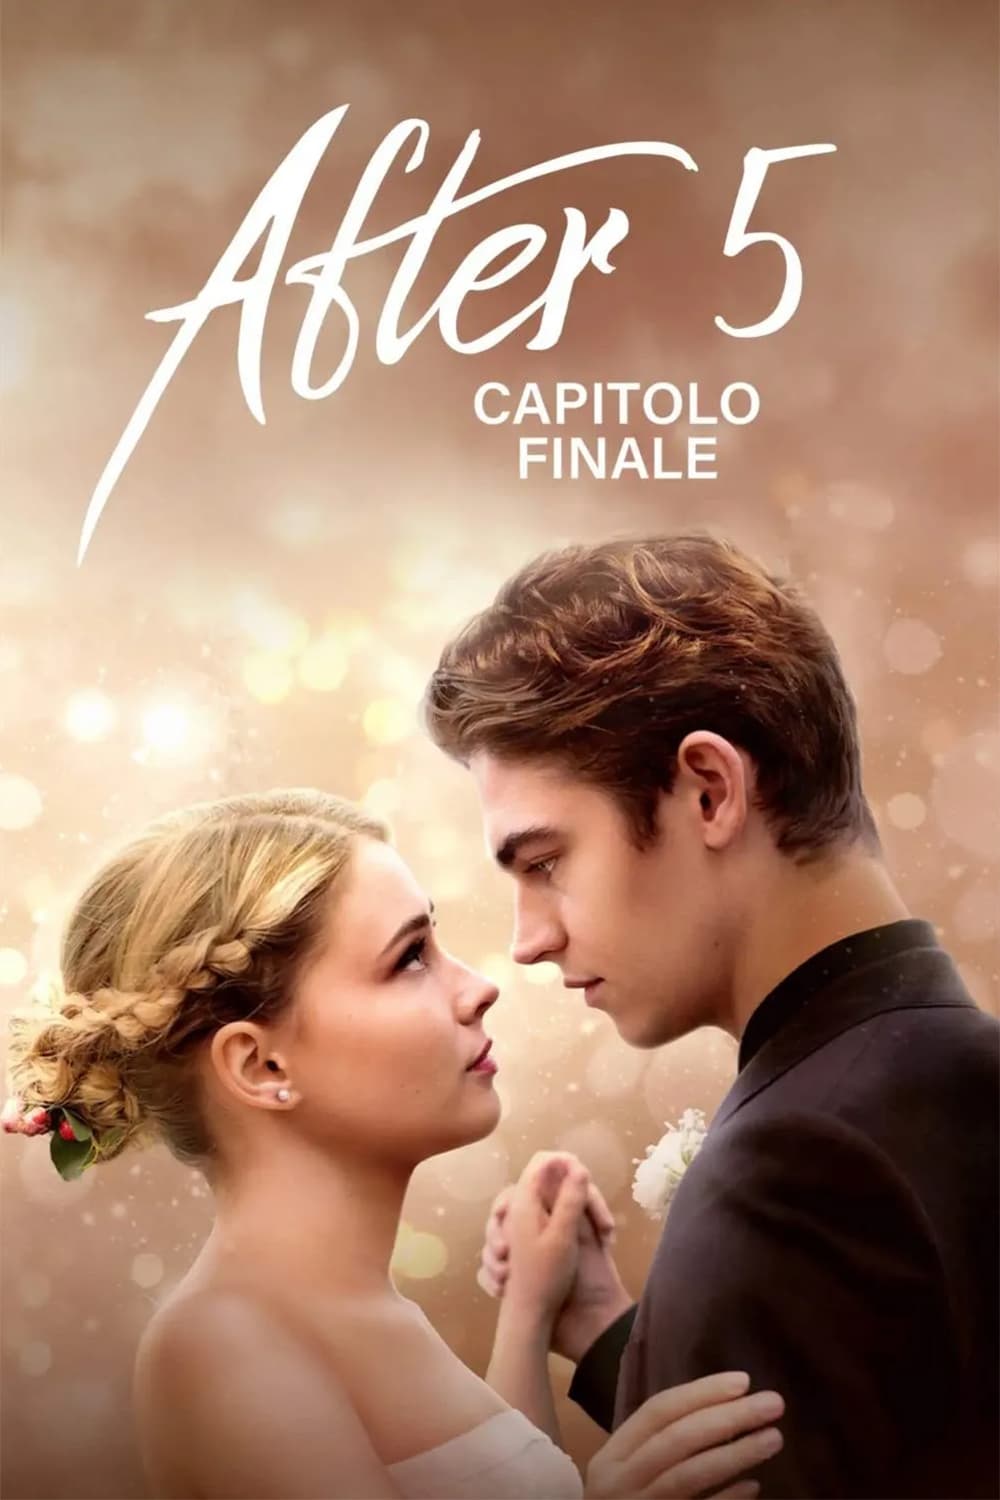 After 5 - Capitolo finale film